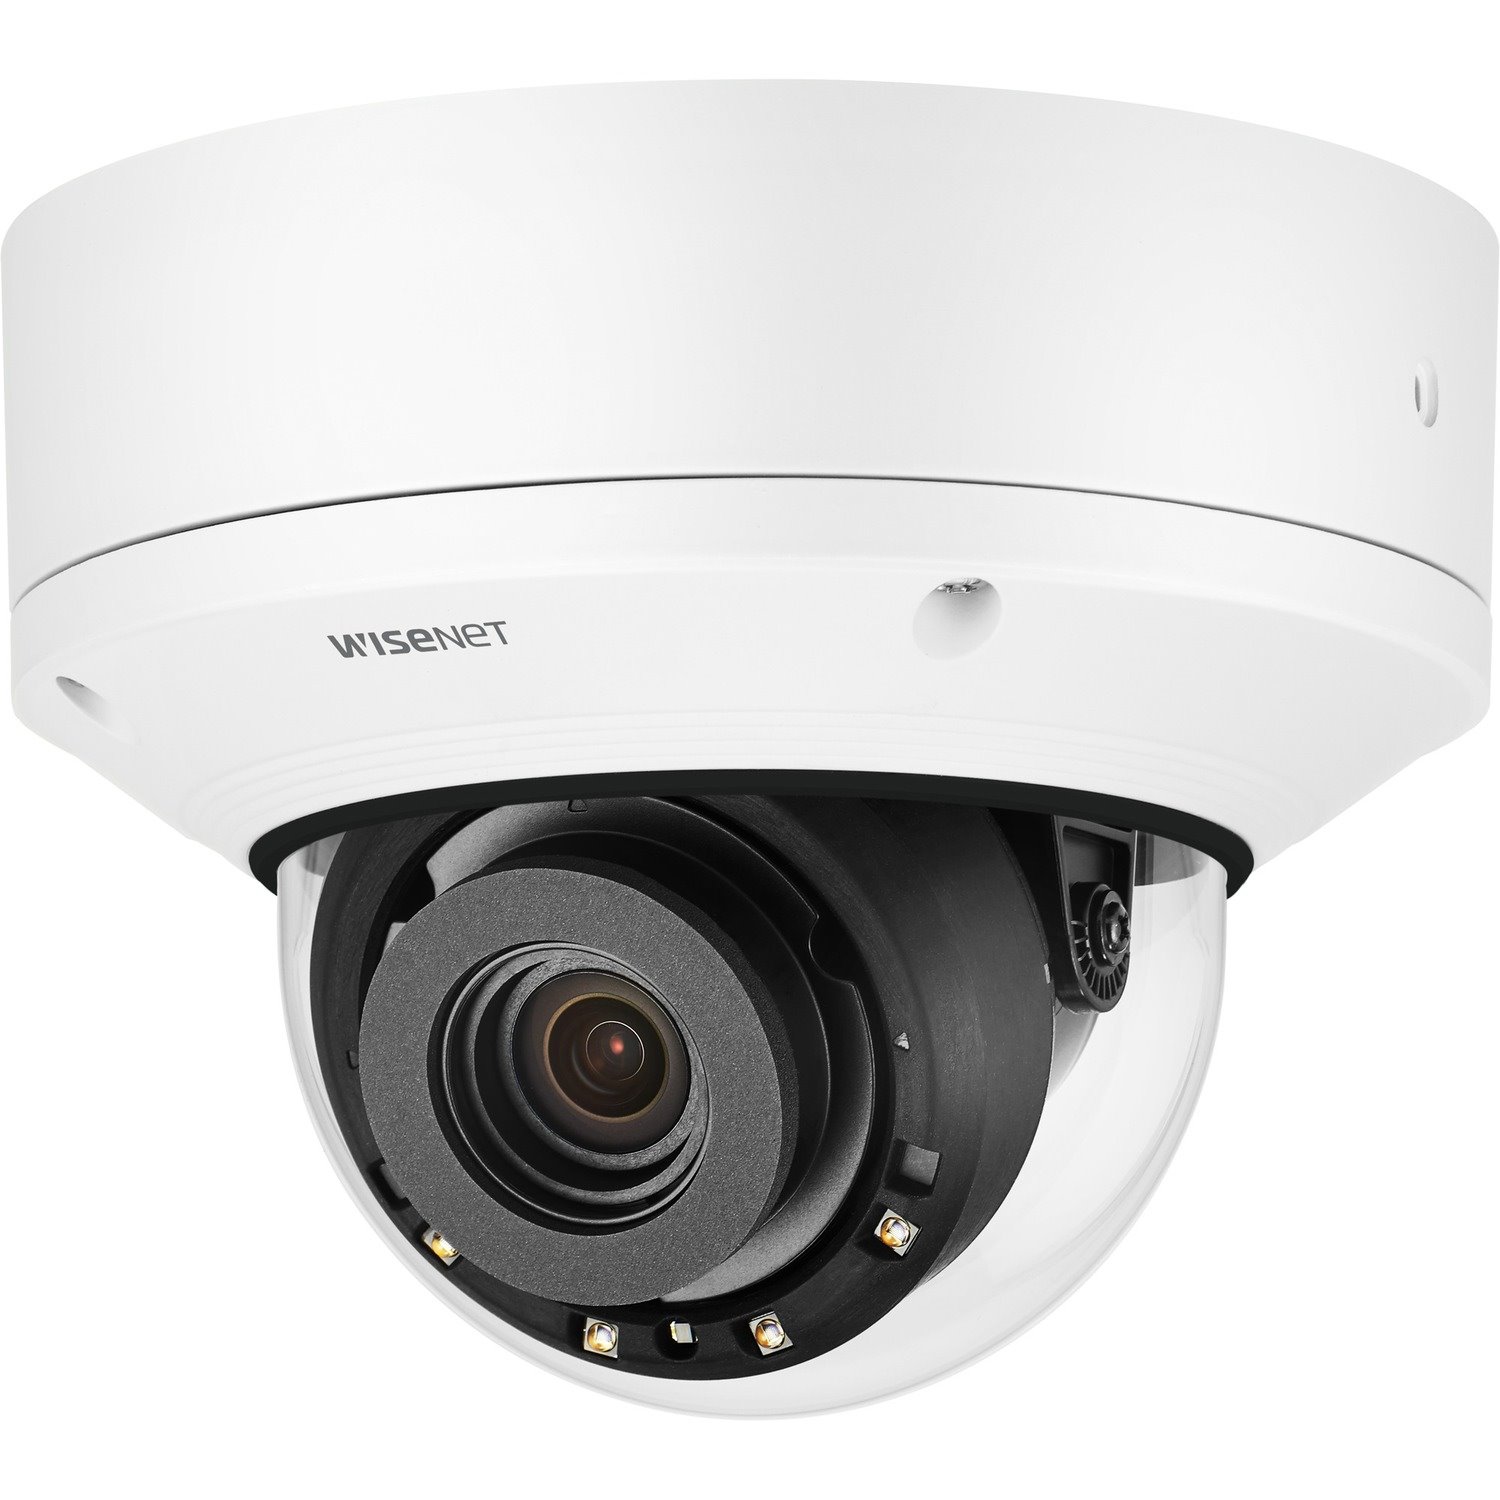 Wisenet XND-8082RV 6 Megapixel Indoor HD Network Camera - Color, Monochrome - Dome - Signal White